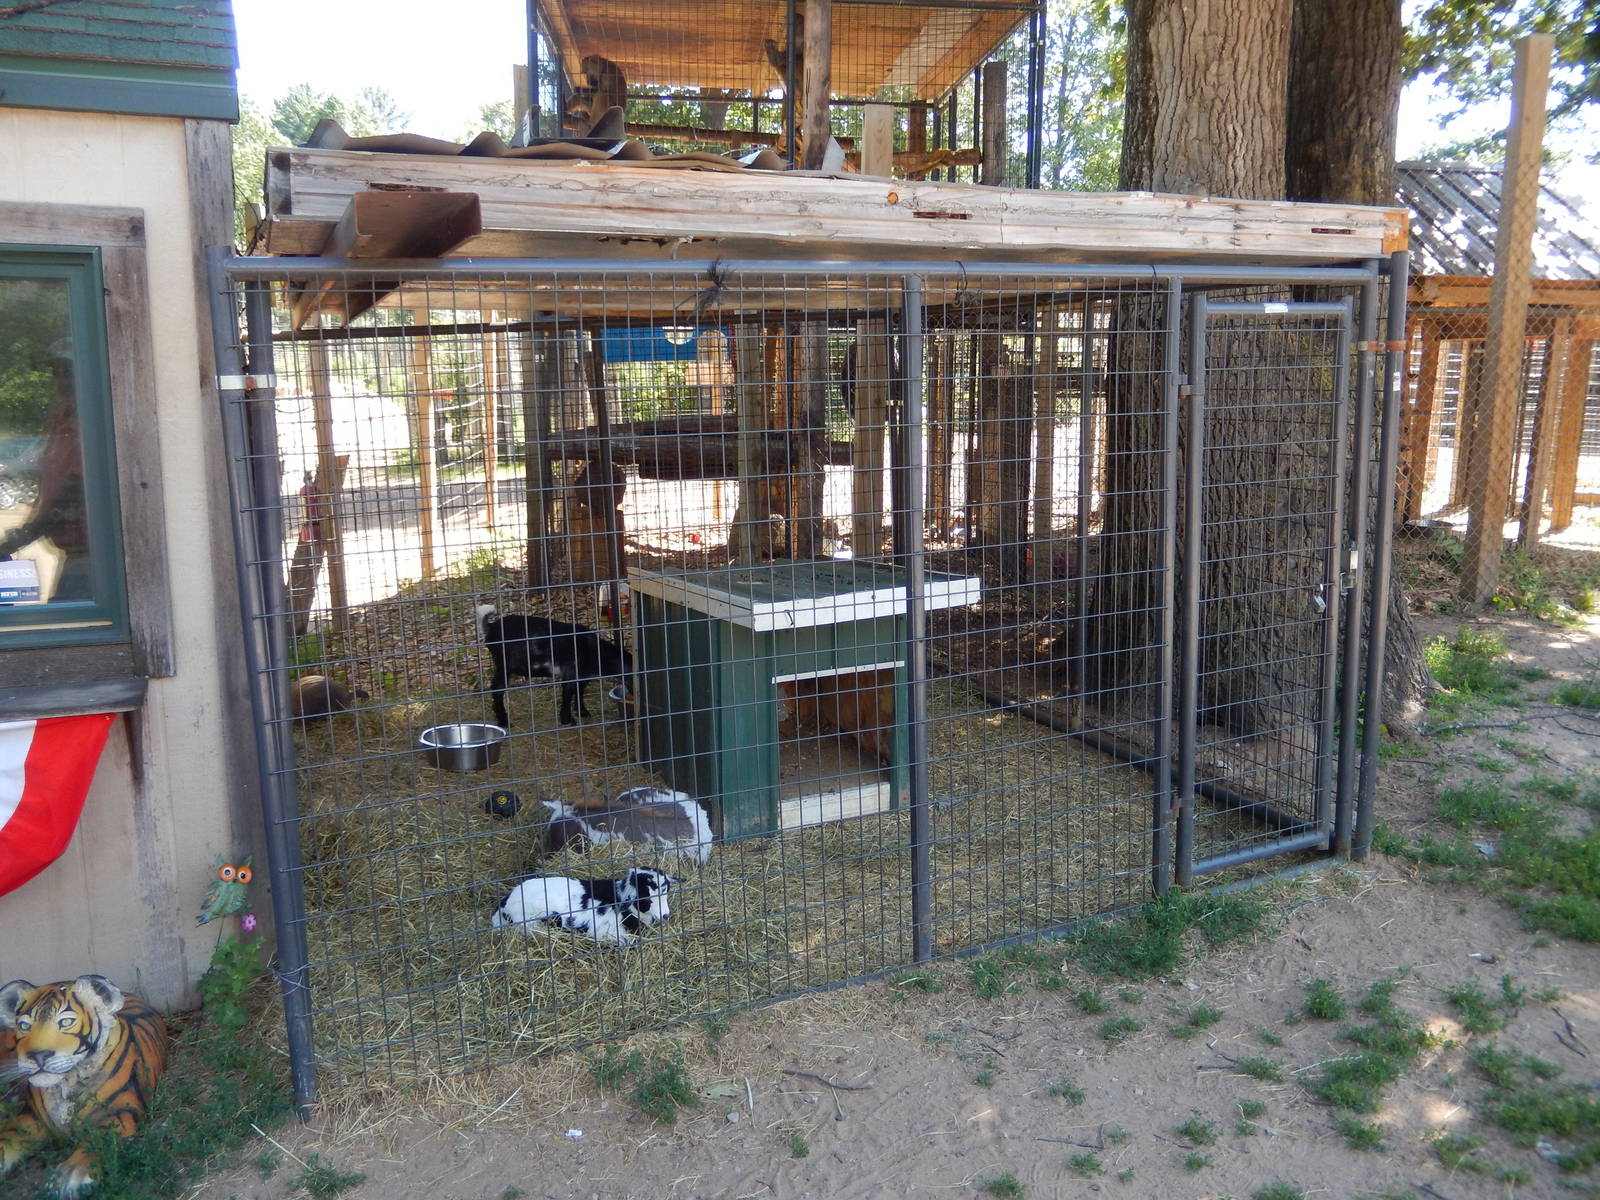 Cage with goats